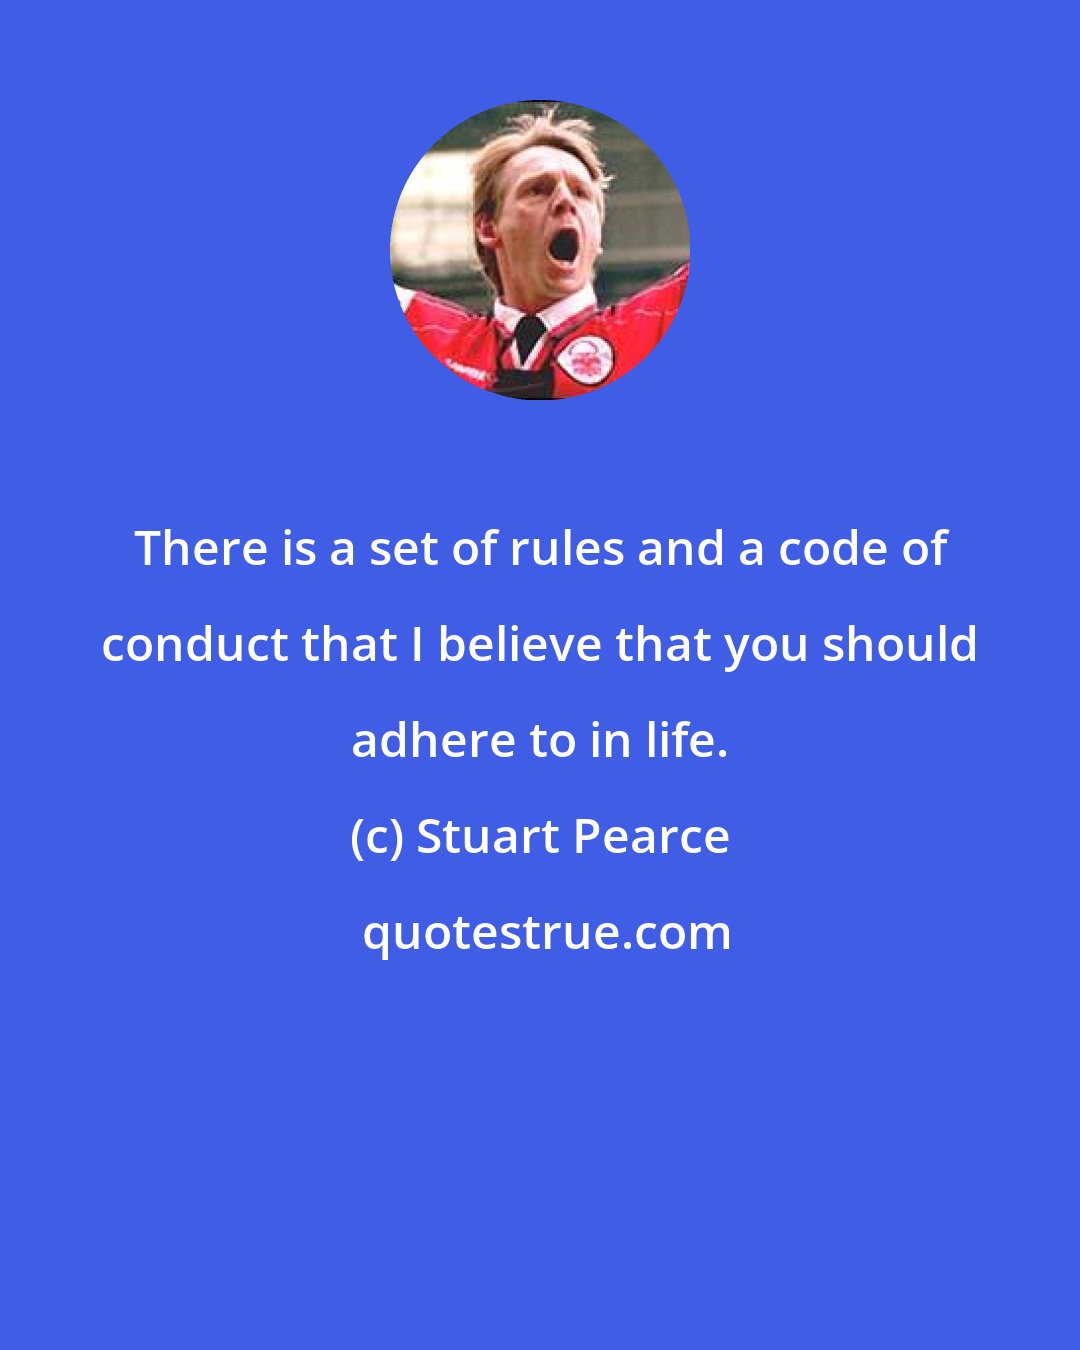 Stuart Pearce: There is a set of rules and a code of conduct that I believe that you should adhere to in life.